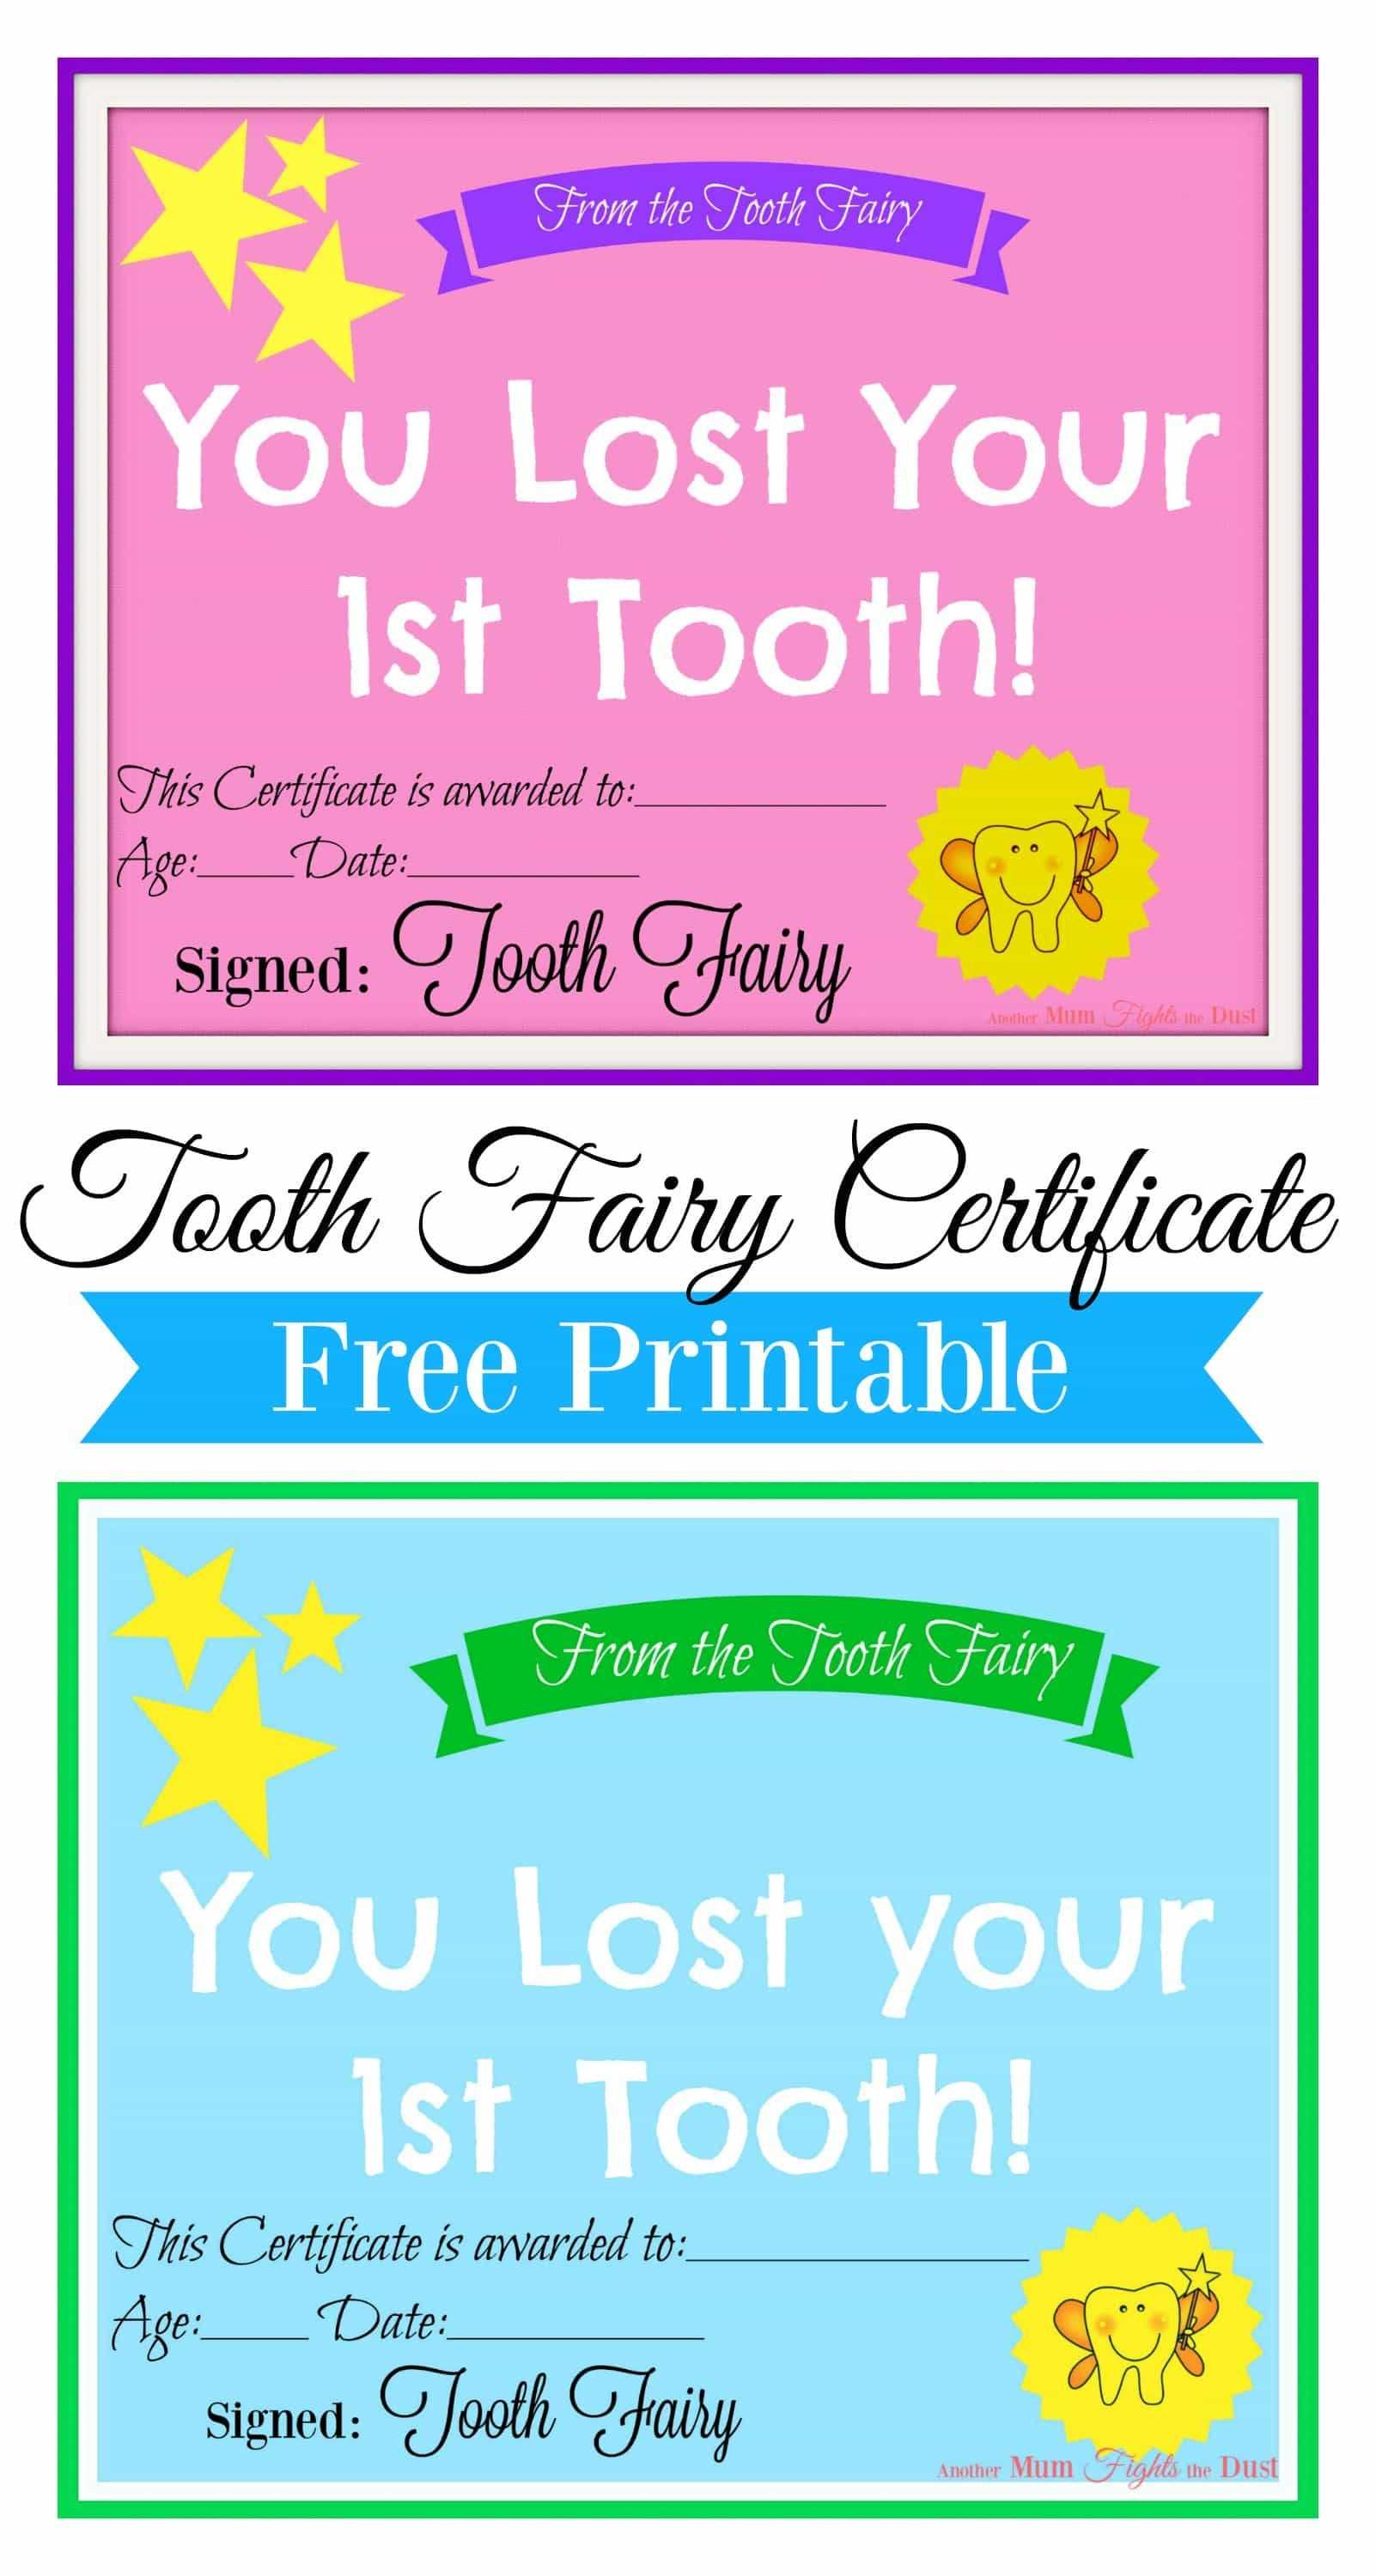 Free Printable Tooth Fairy Certificate | Tooth Fairy Ideas Throughout Tooth Fairy Certificate Template Free